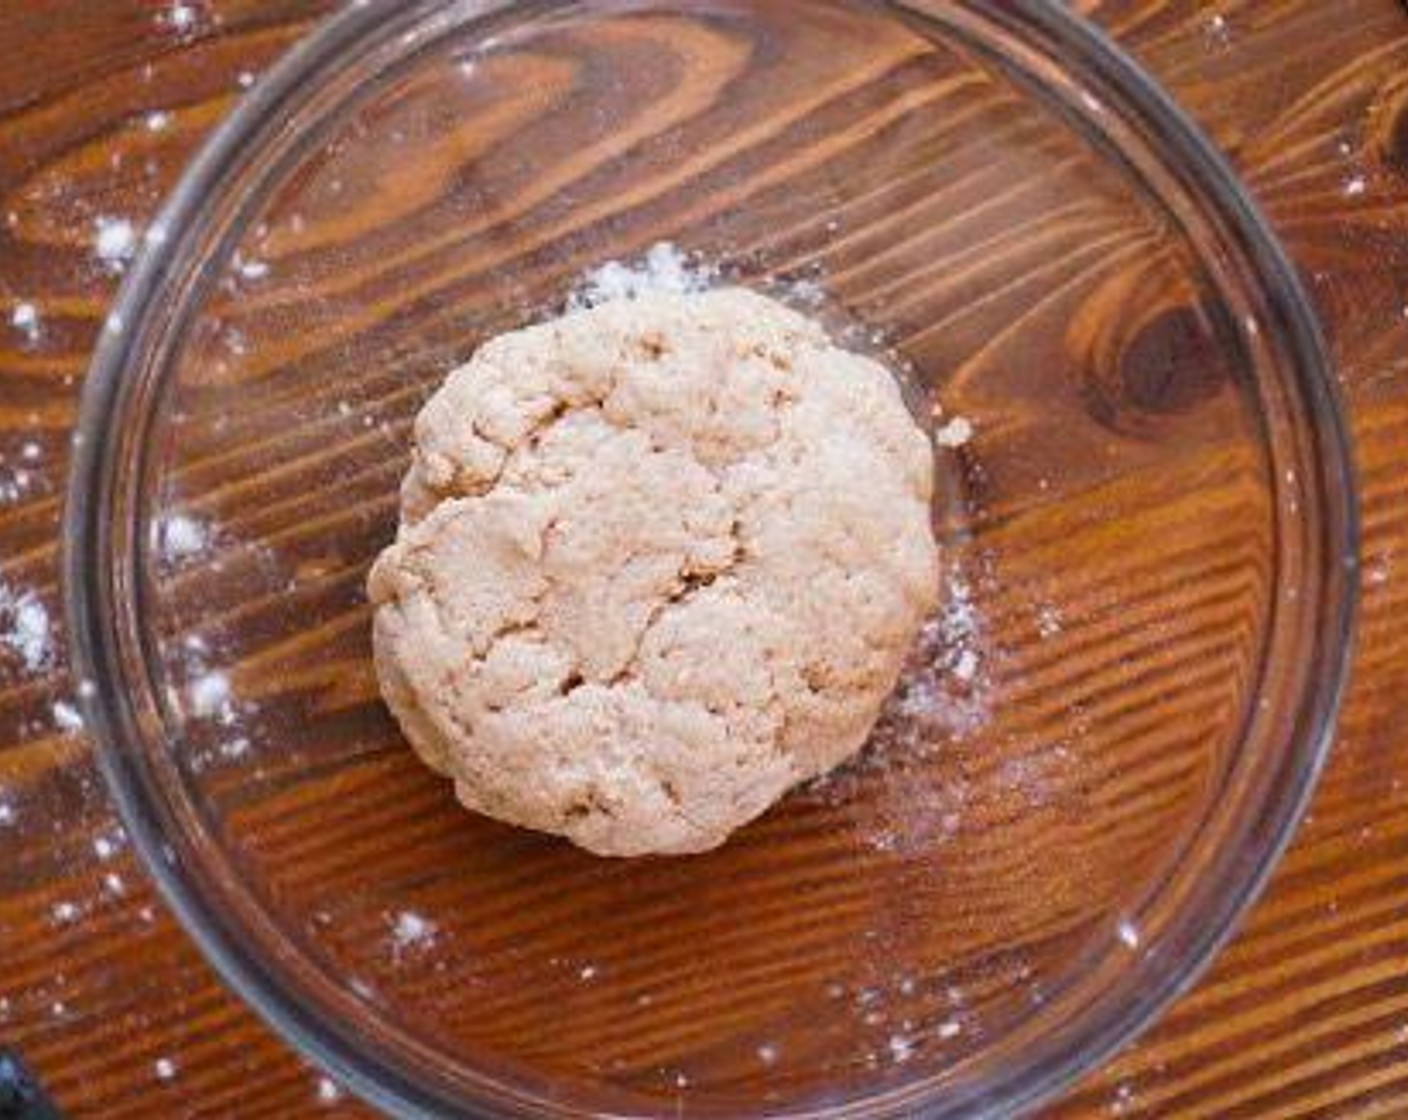 step 3 Transfer the dough to a bowl, cover with plastic wrap, and rest at room temperature for 1-2 hours.